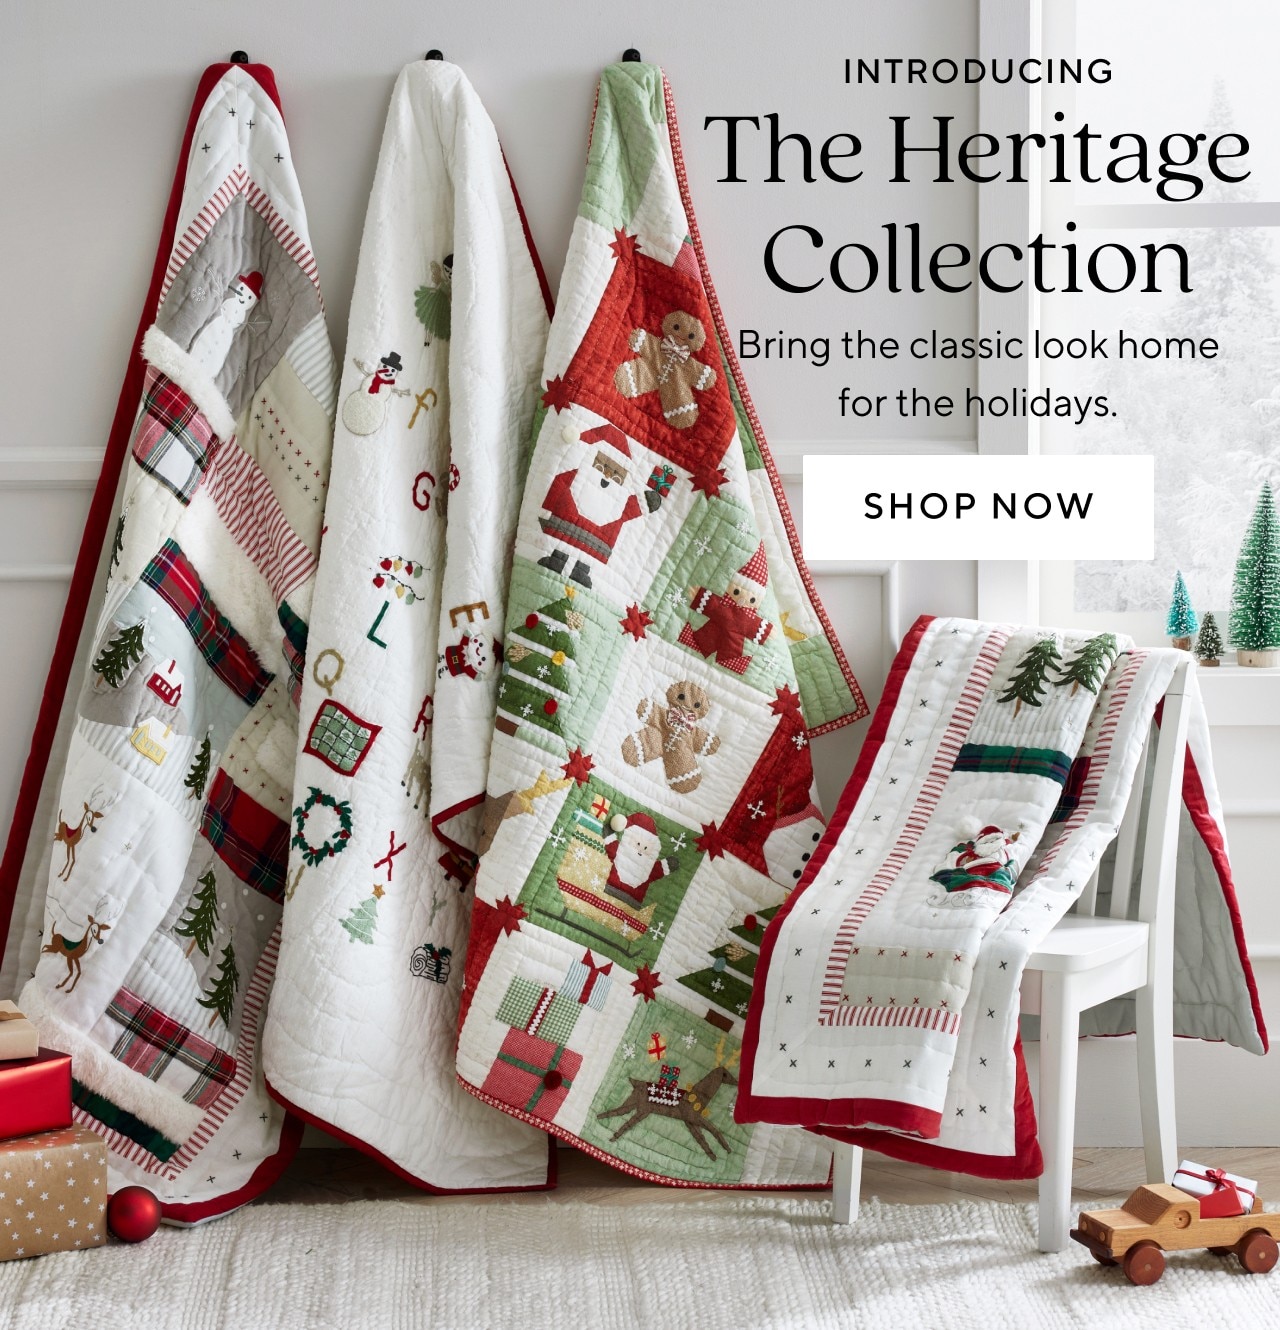 INTRODUCING THE HERITAGE COLLECTION